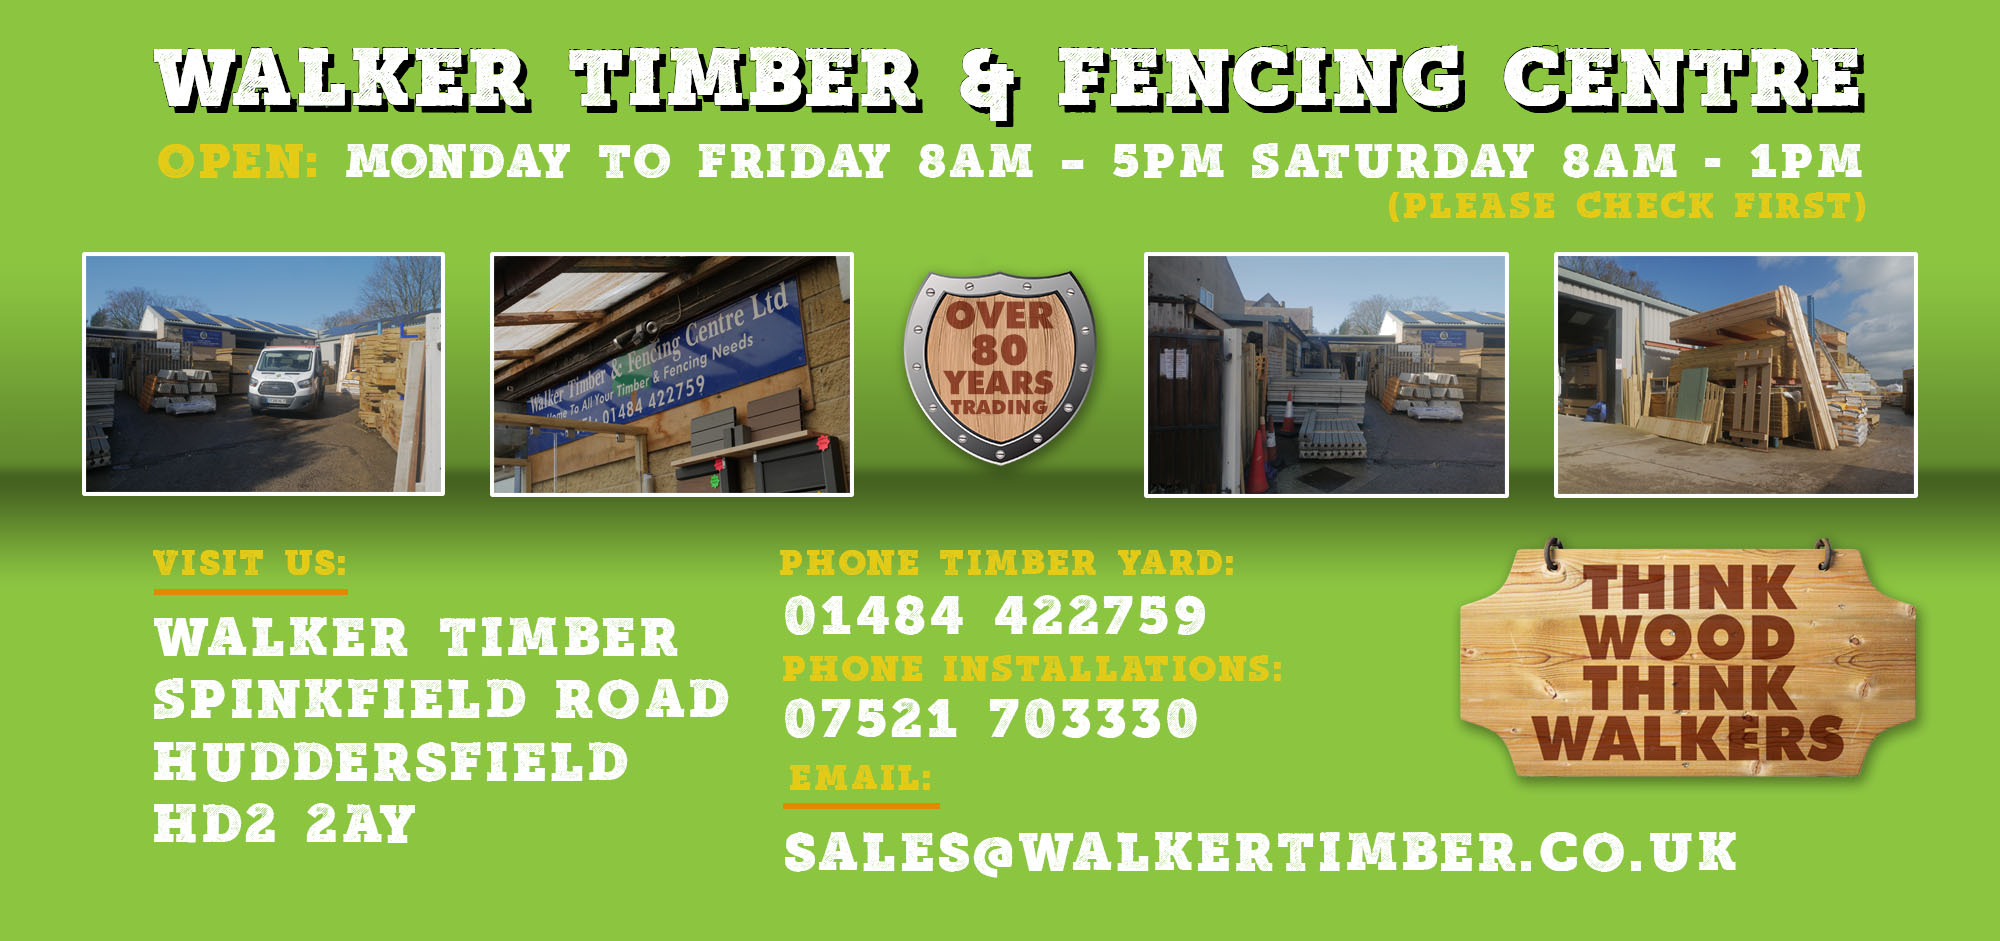 walker timber opening times